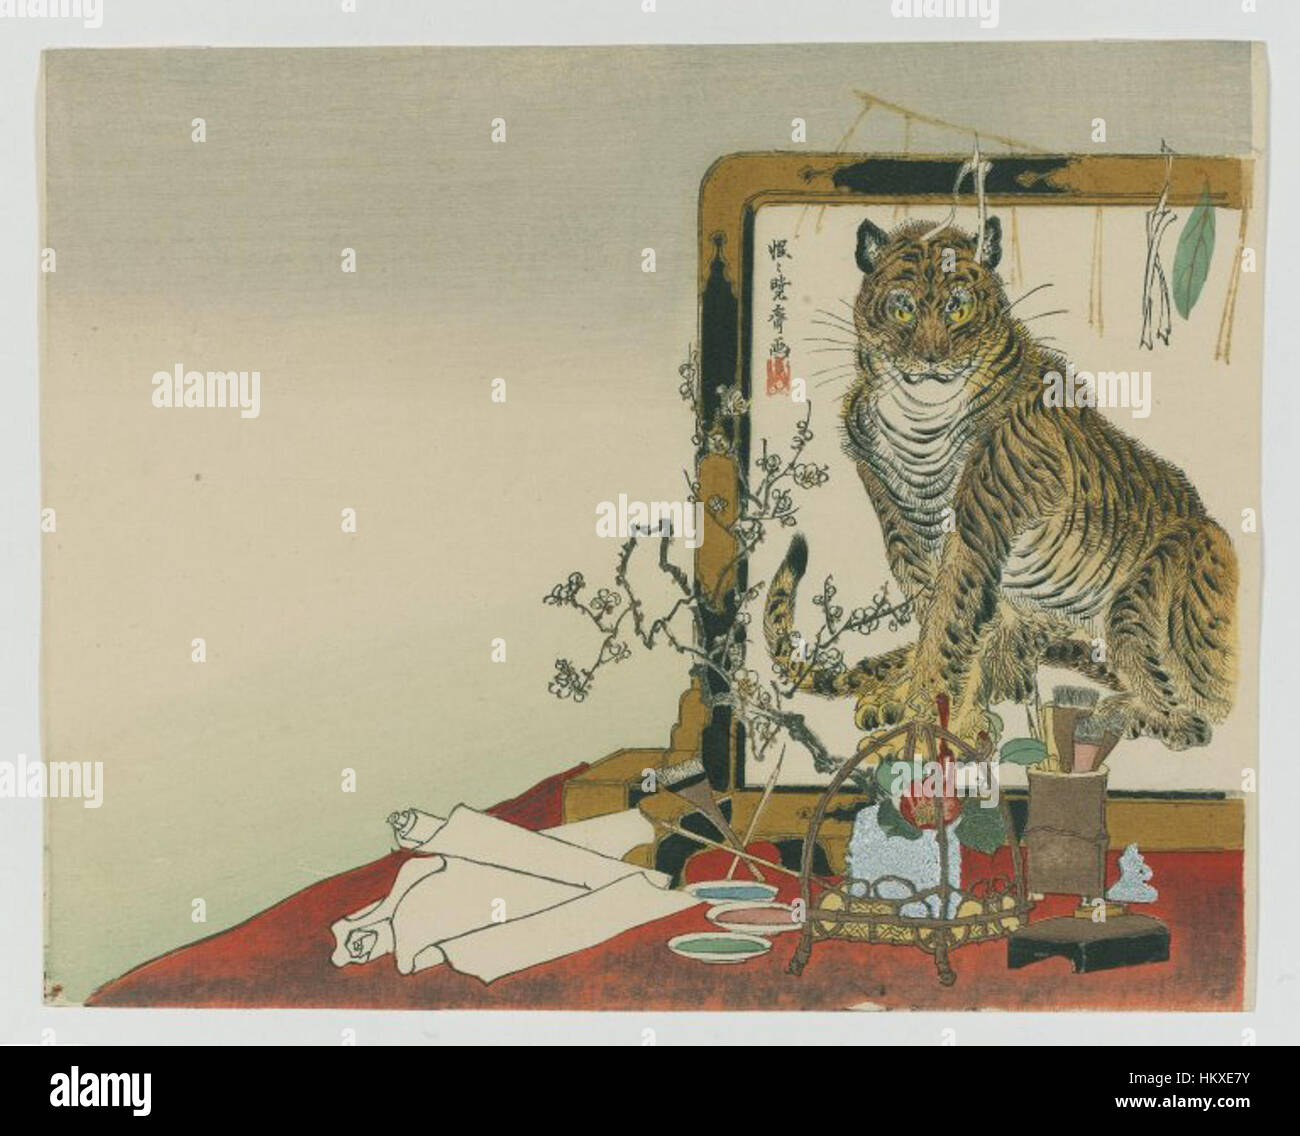 Brooklyn Museum - Standing Screen (Tsuitate) of a Tiger - Kawanabe Kyosai - overall Stock Photo